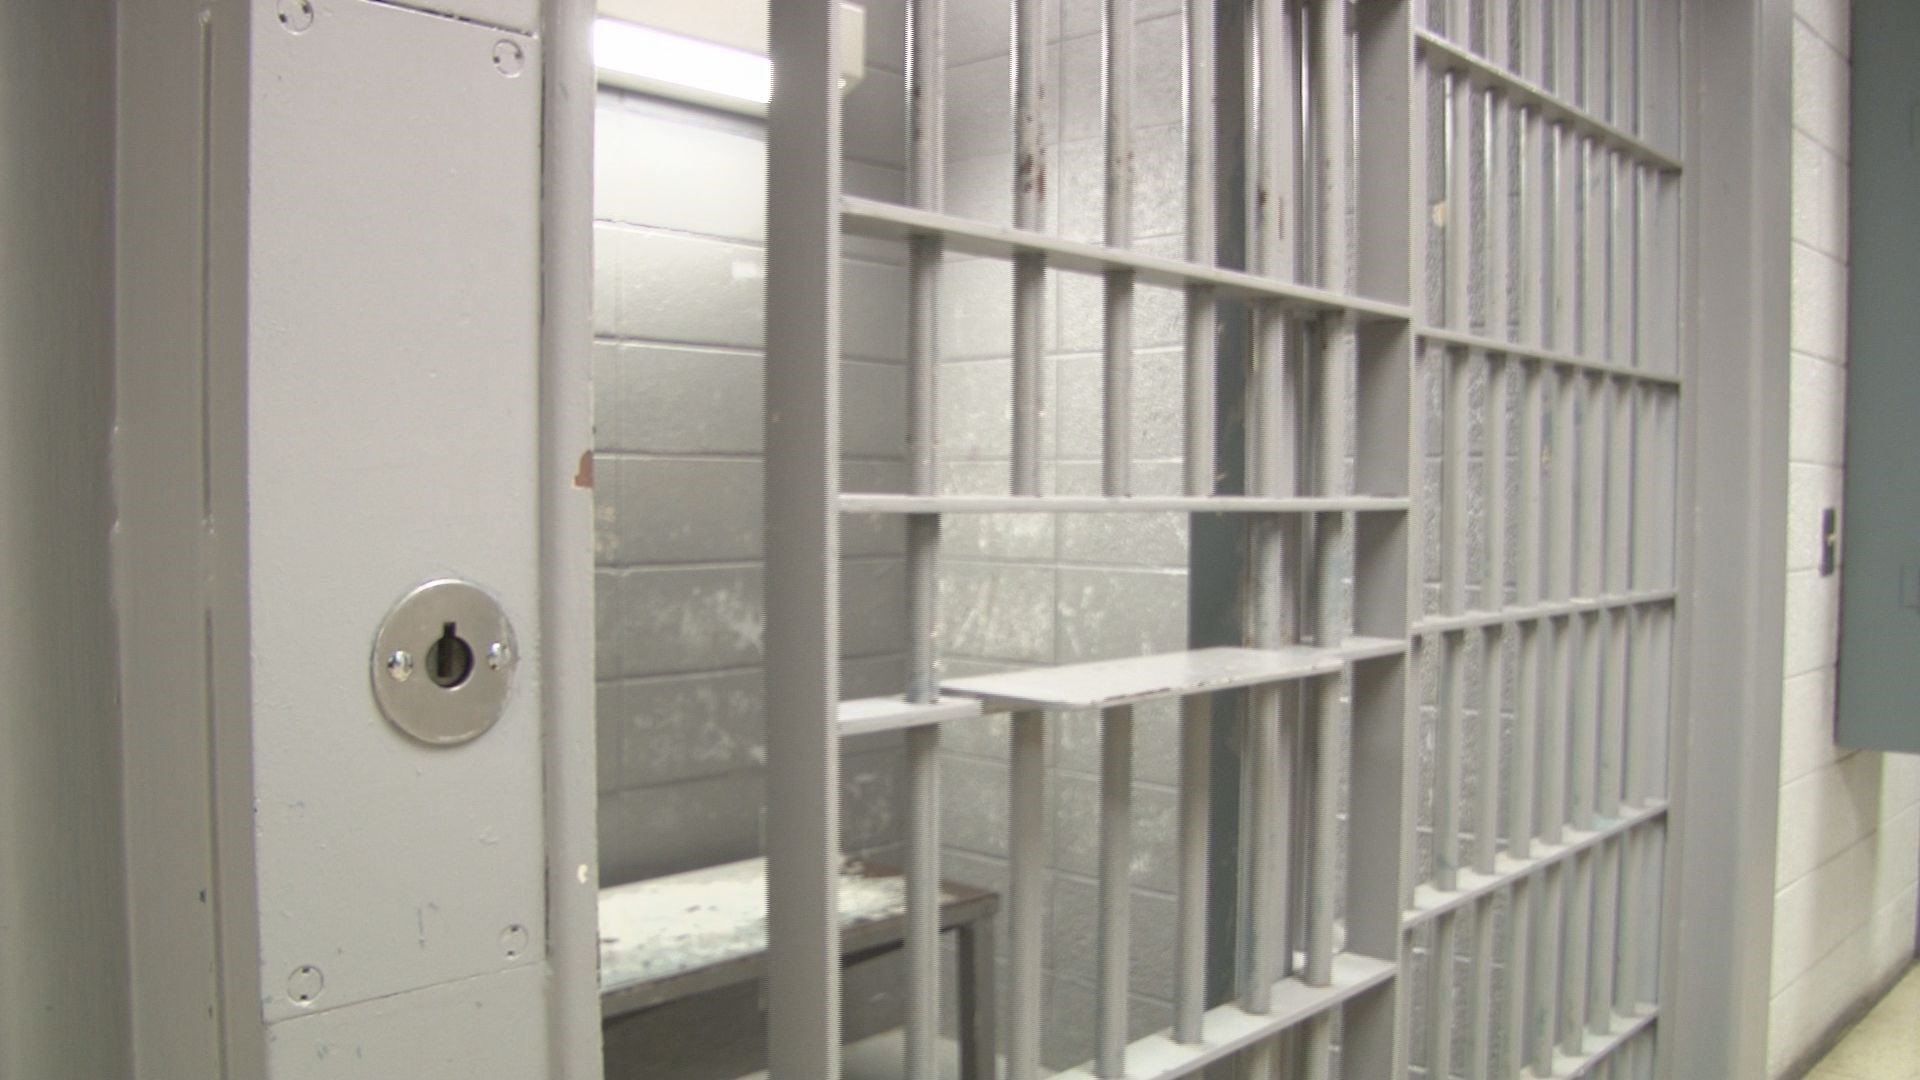 The Milledgeville Police Department closed the city jail this week. Now, all jail services in the incorporated area will fall to the Baldwin County Sheriff's Office.